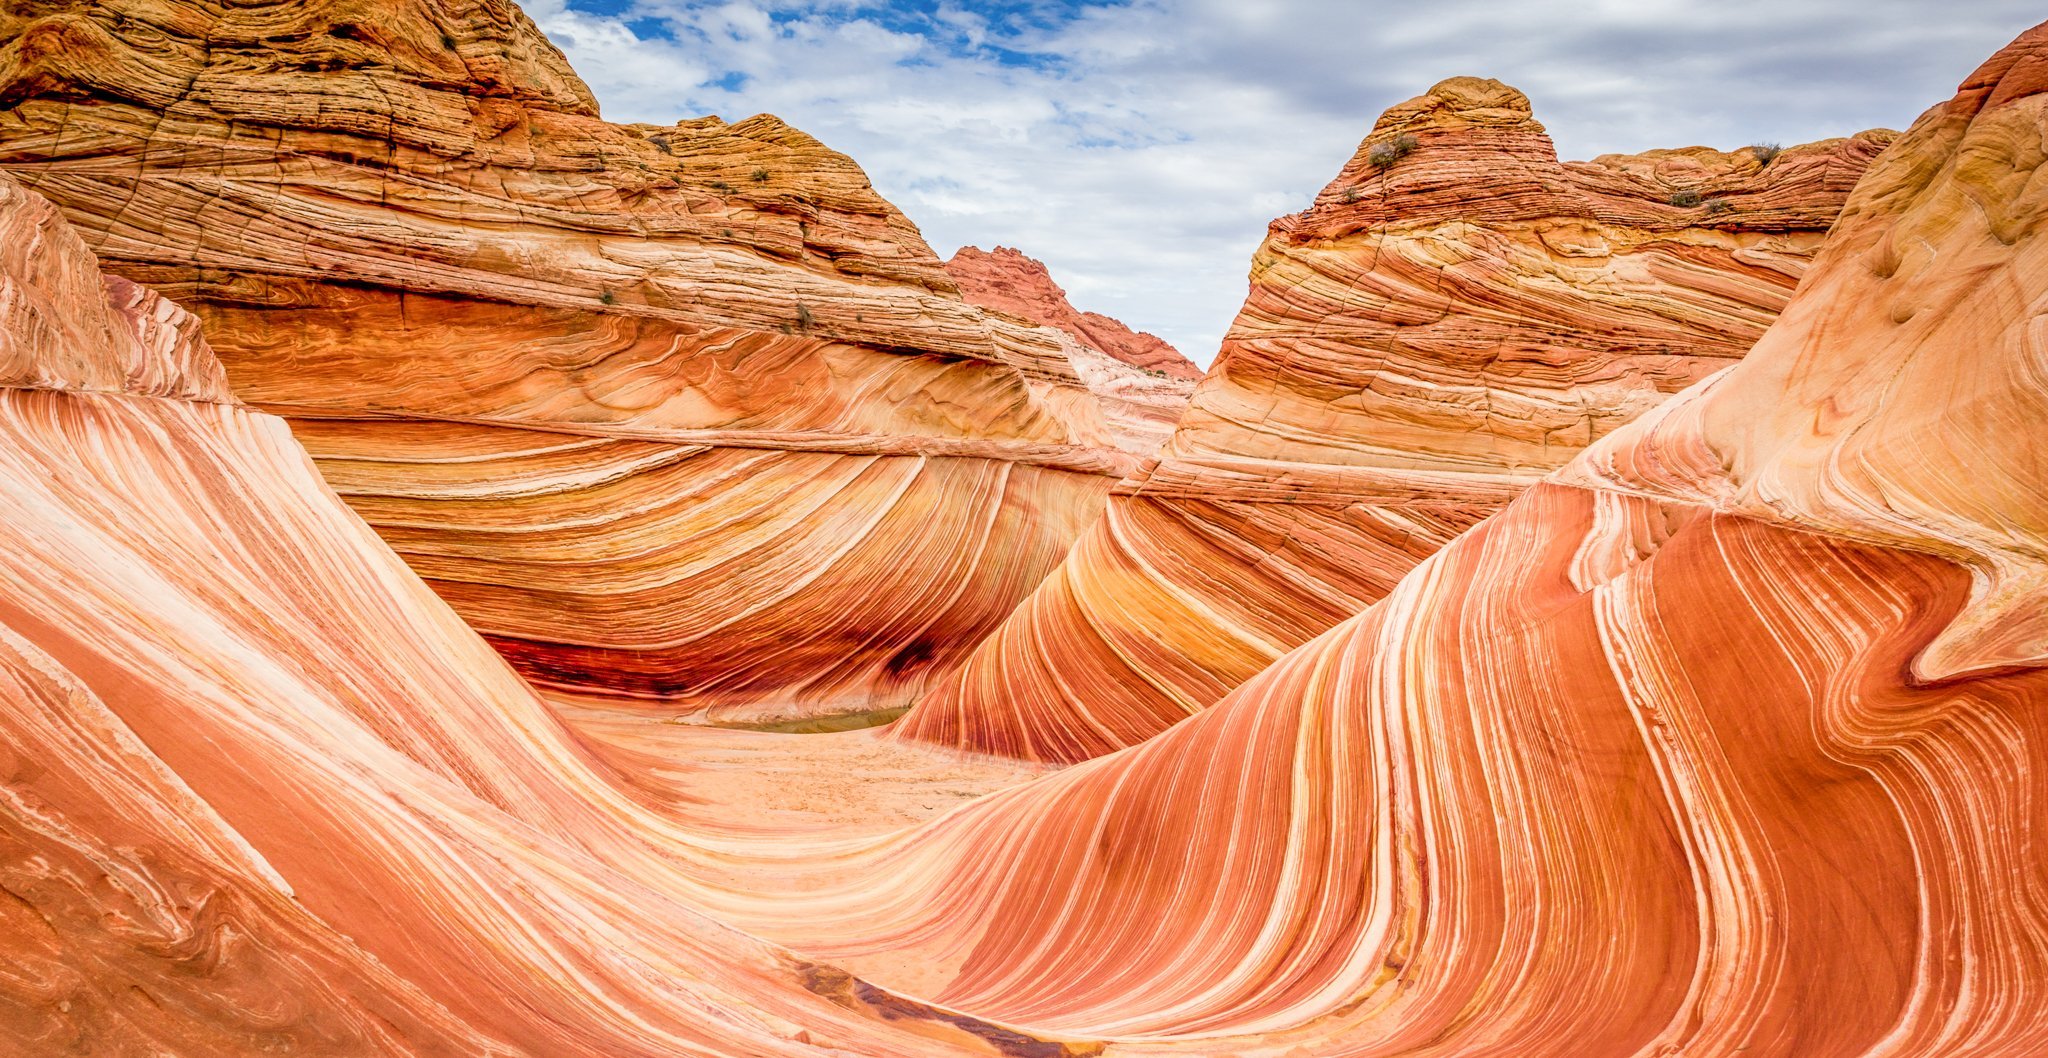 Here's How To Visit The Wave In Coyote Buttes For A Perfect Photo